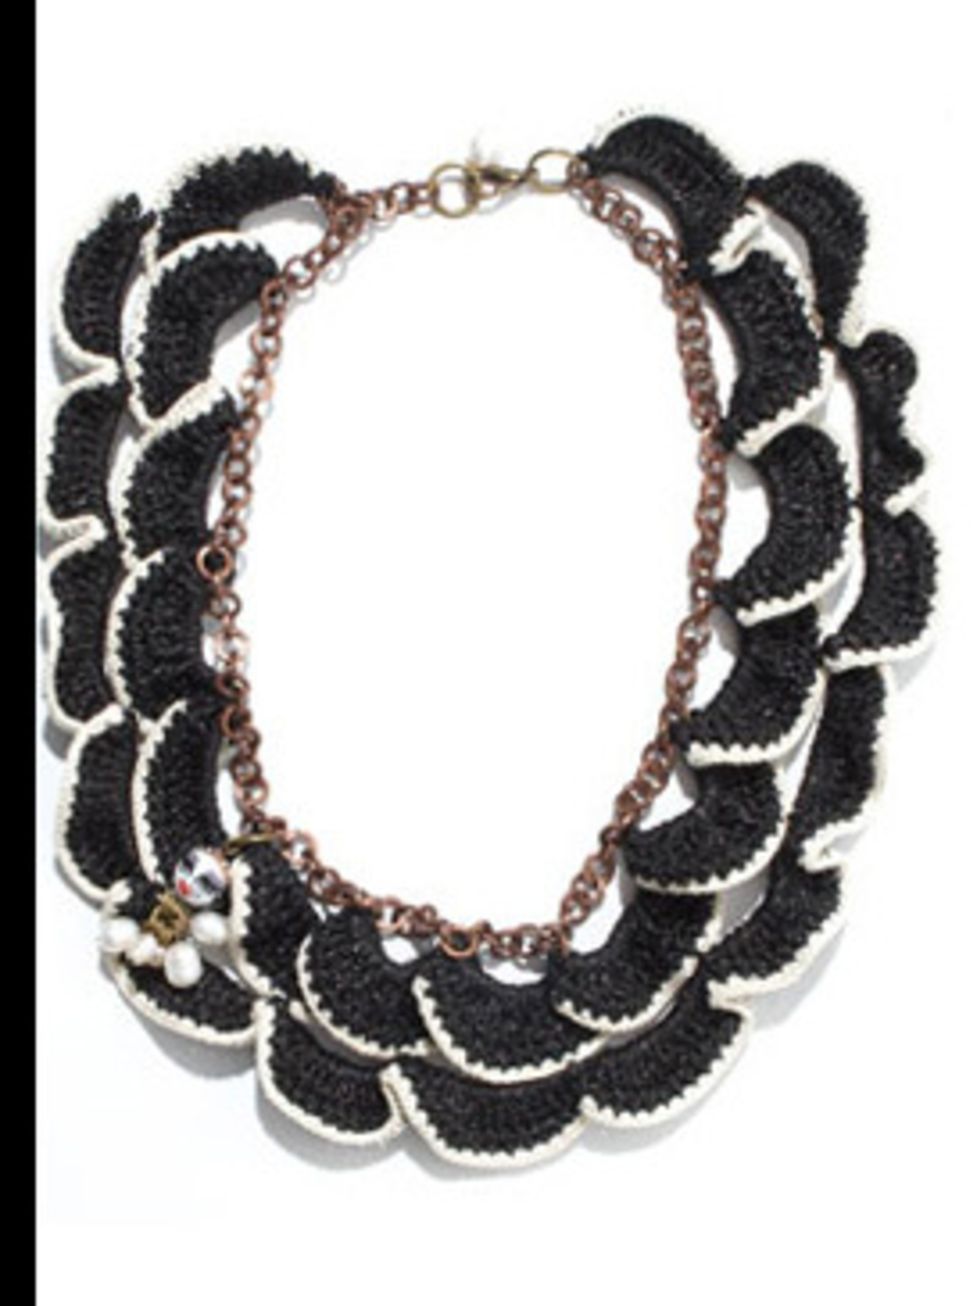 <p>Necklace, £65.00 by Adorisadora at <a href="http://www.dolcev.com/product.php?ProdID=921&amp;DeptID=30">Dolce V</a></p>